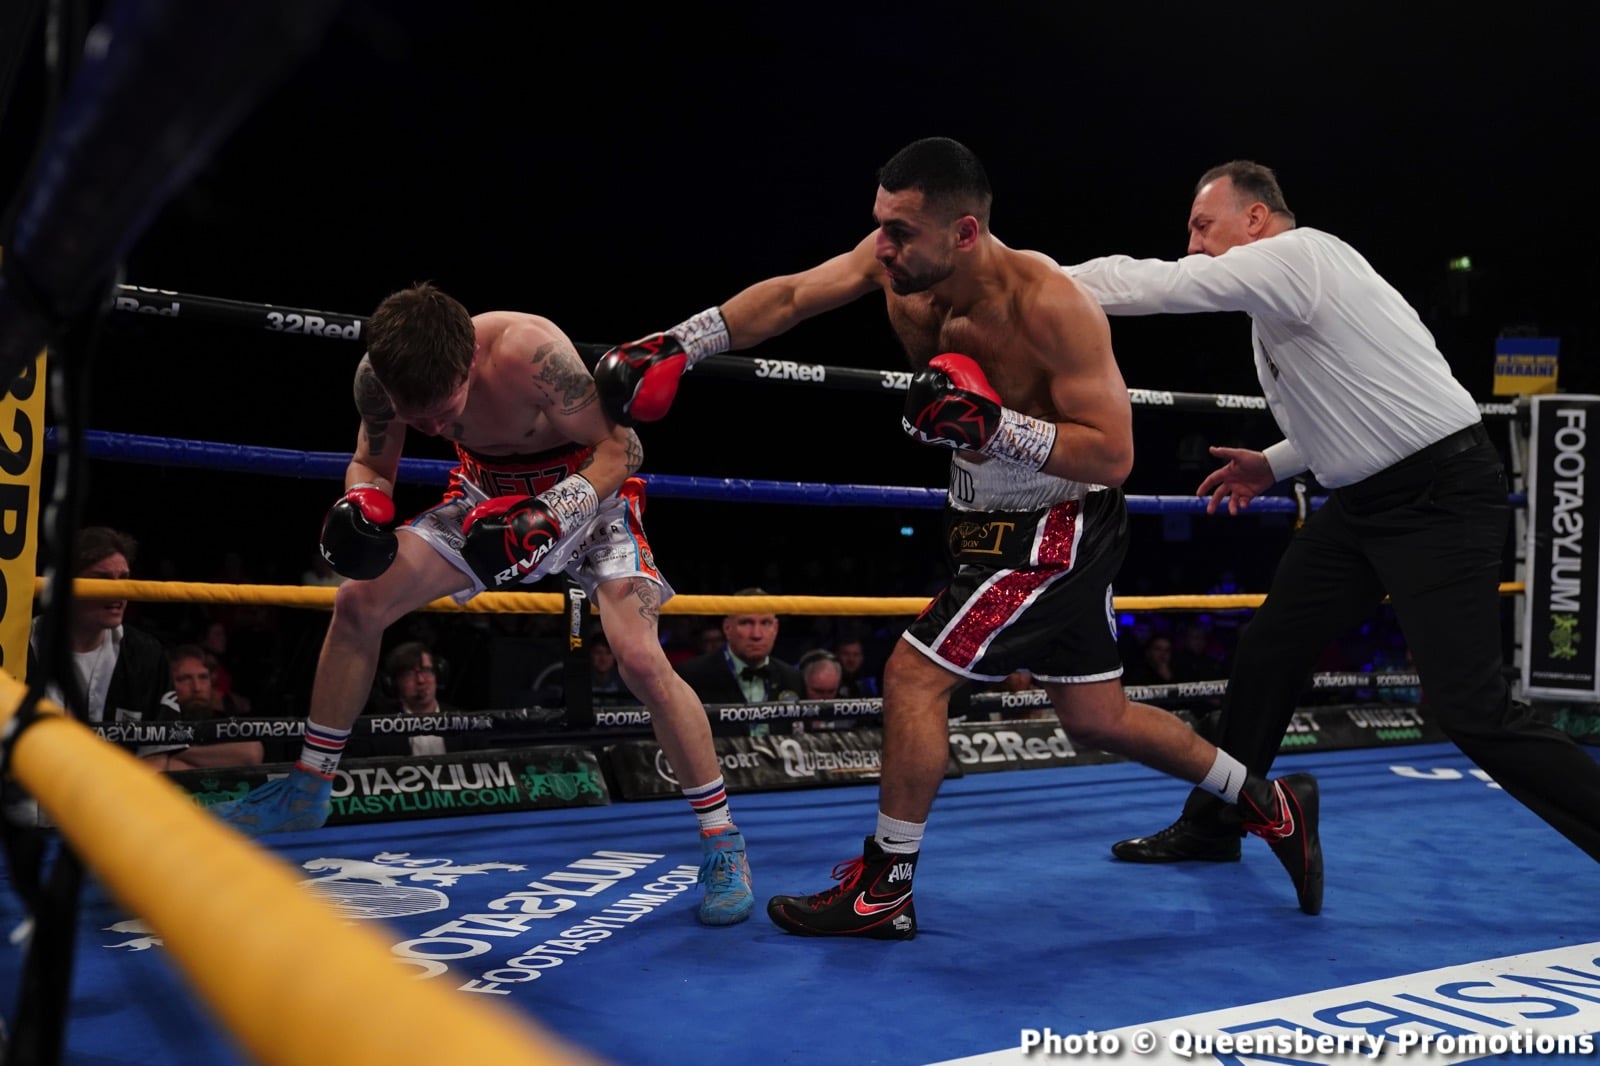 Image: Boxing Results: David Avanesyan destroys Metz in 1st round TKO